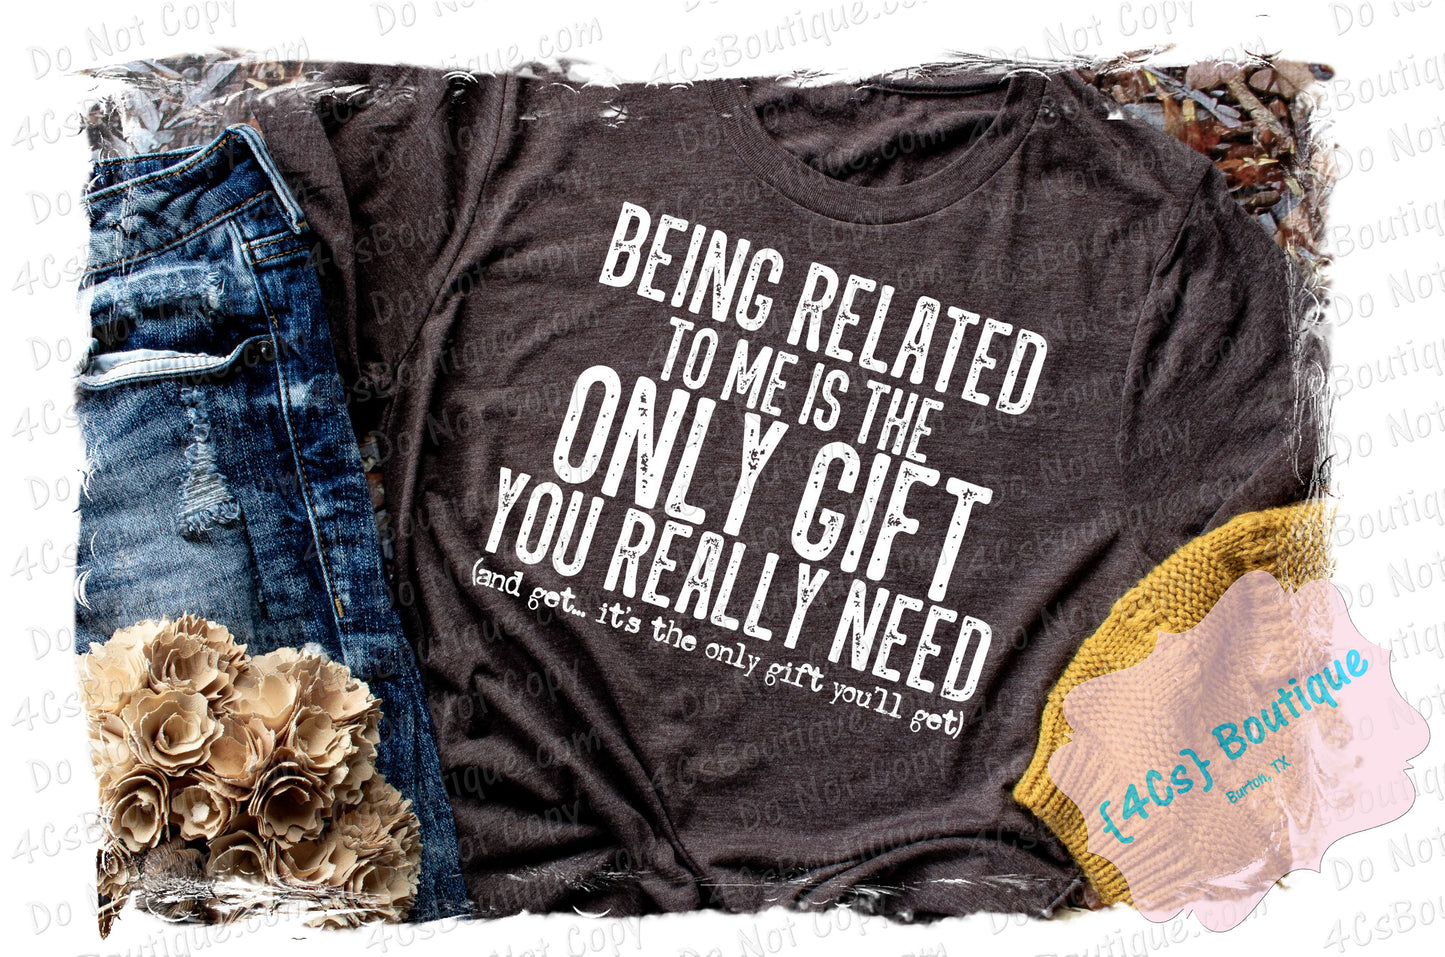 Being Related To Me Is The Only Gift You Really Need Shirt